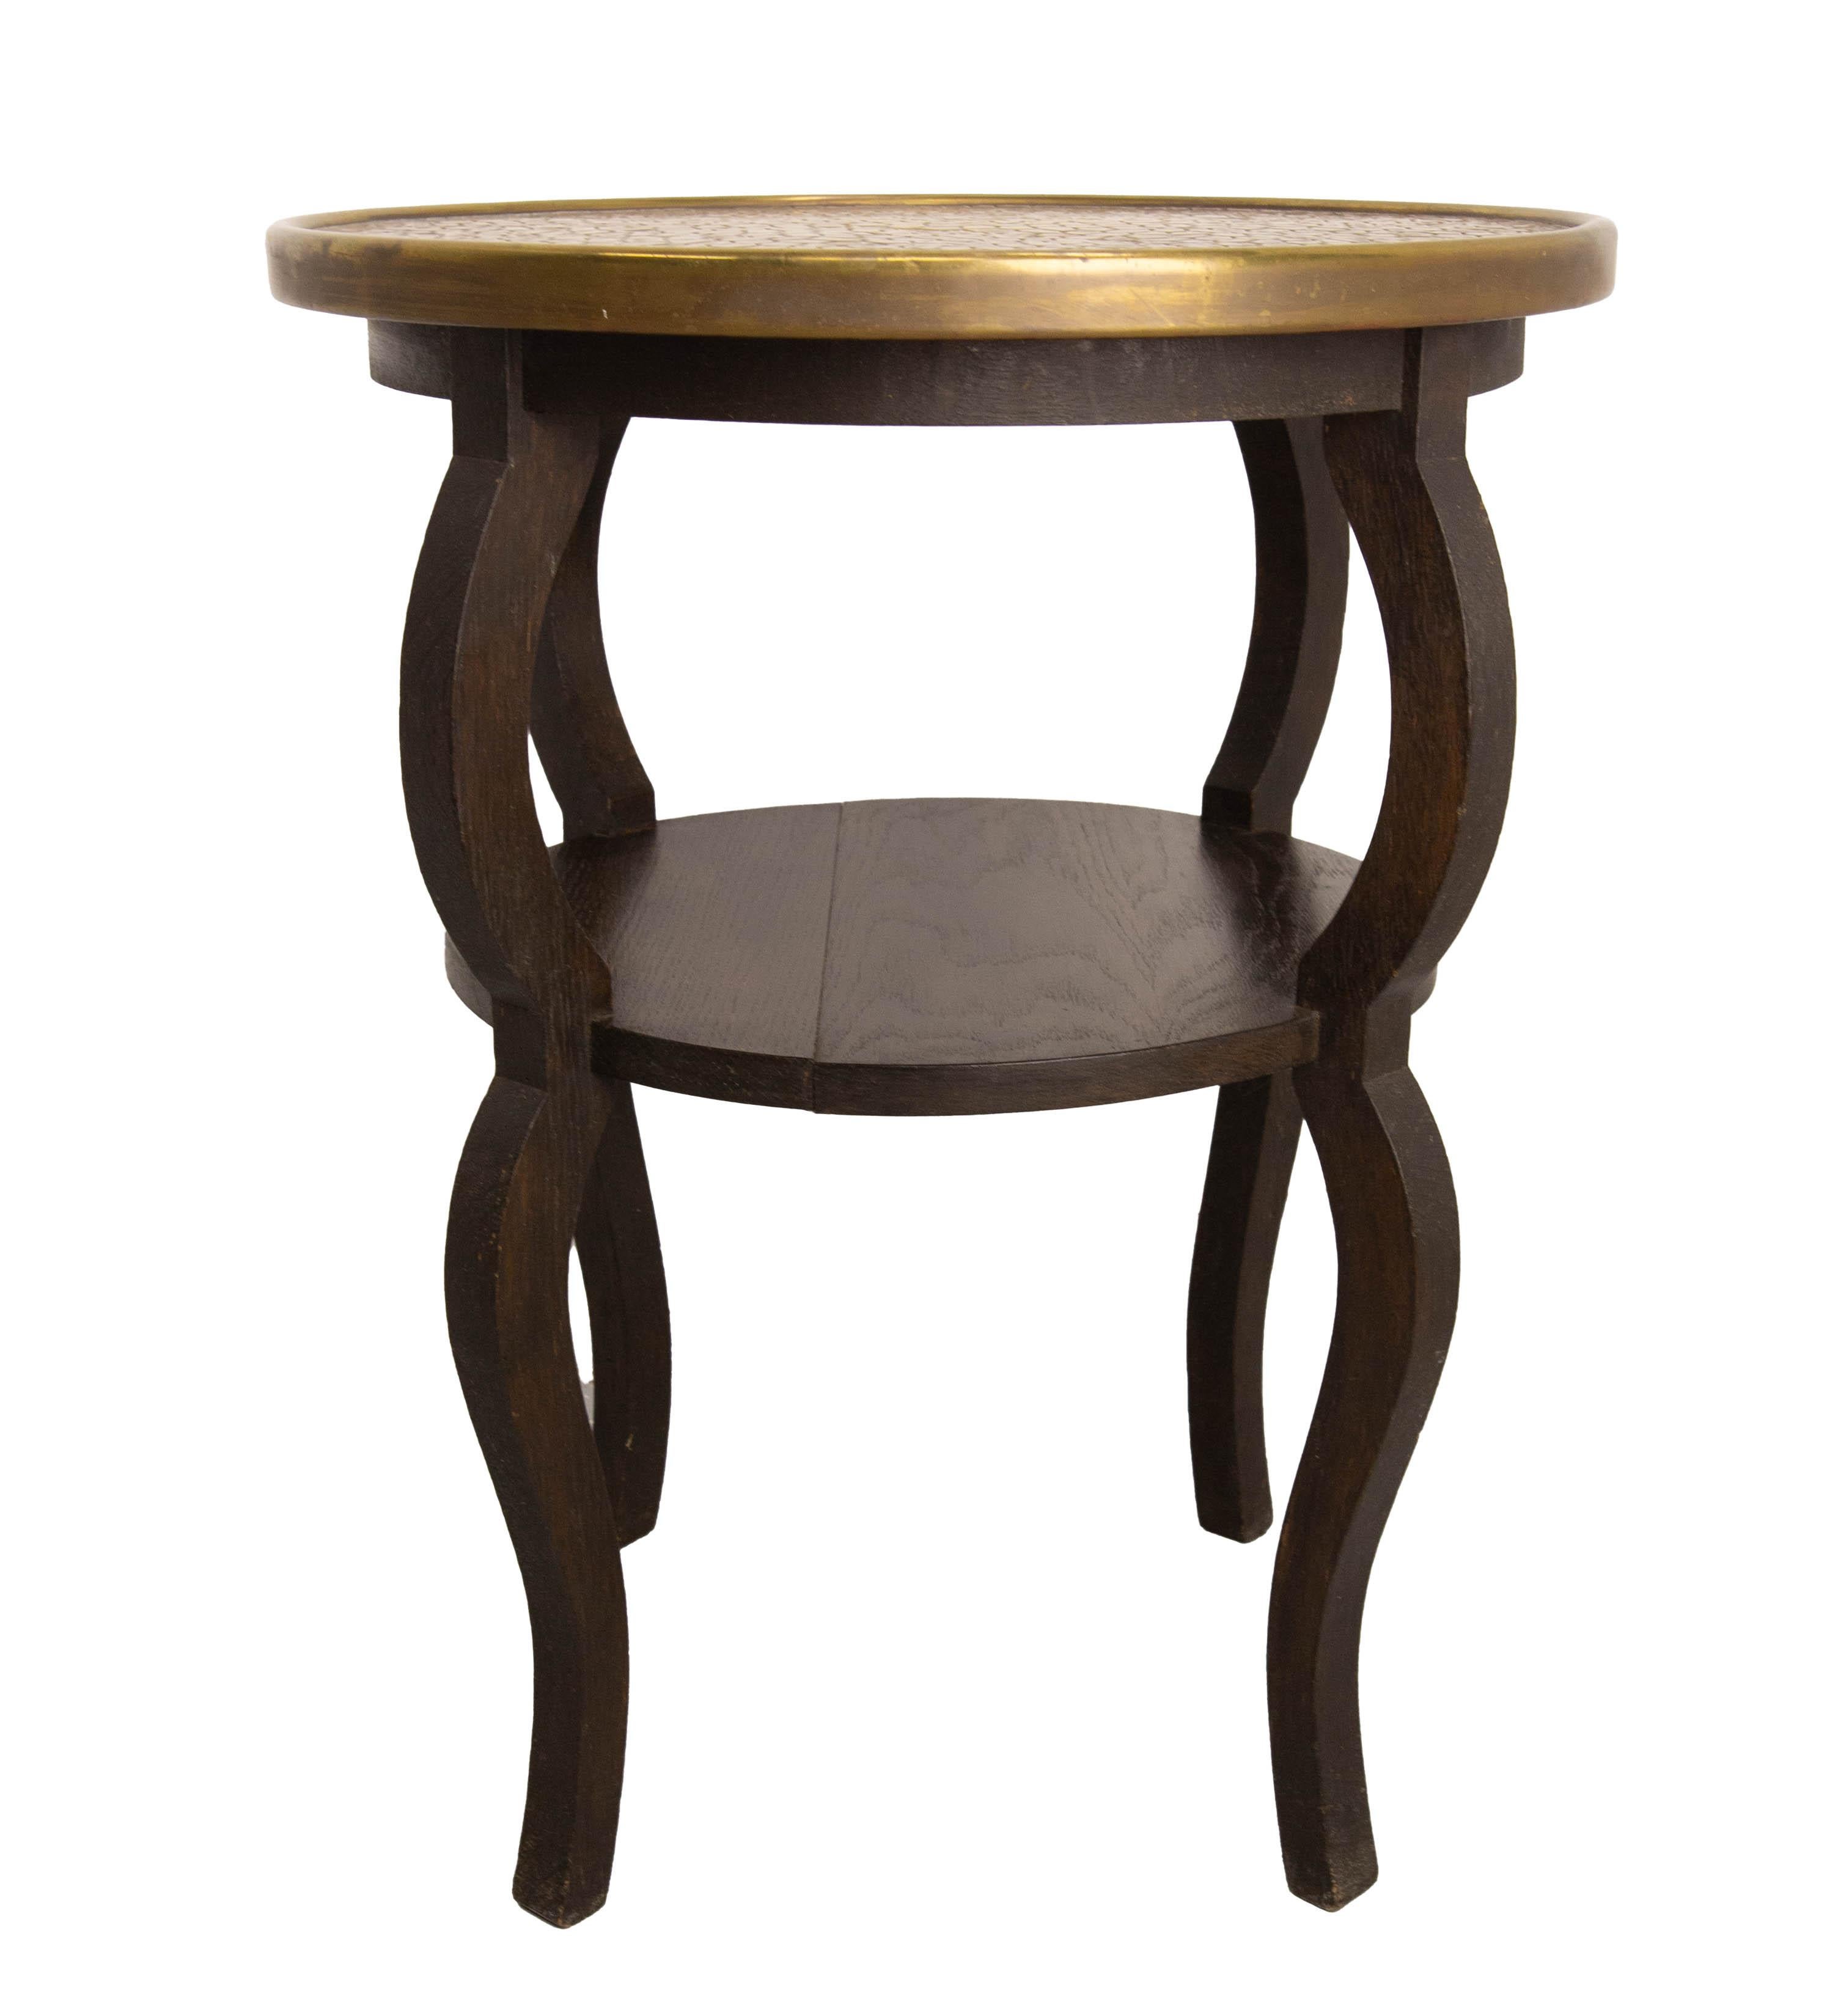 French Chestnut & Copper Table Sellette Side Table or Coffee Table, circa 1940 For Sale 2